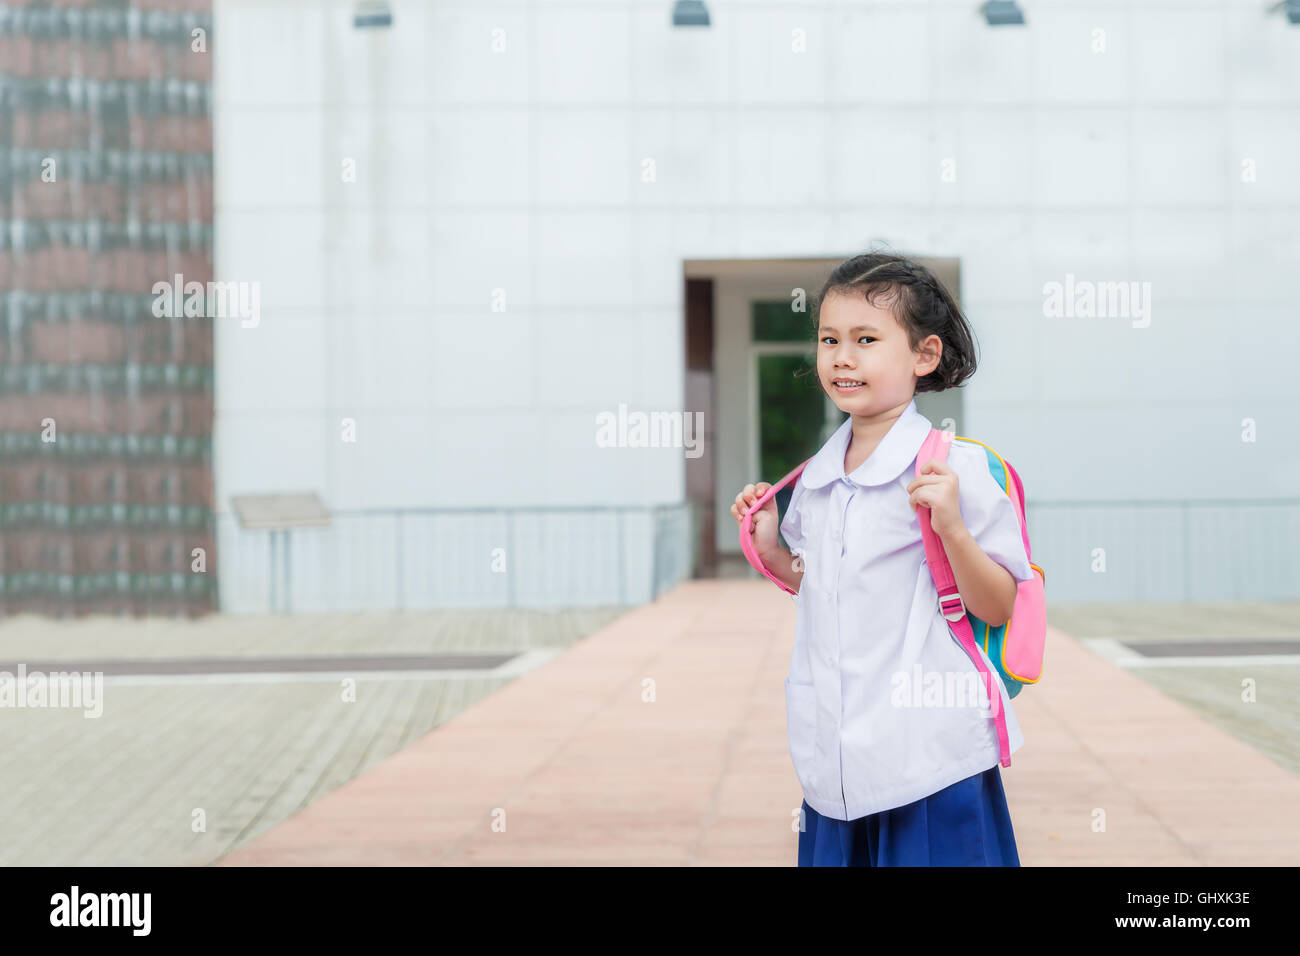 Asian girl kid student in uniform going to school. Student back to school concept. Stock Photo